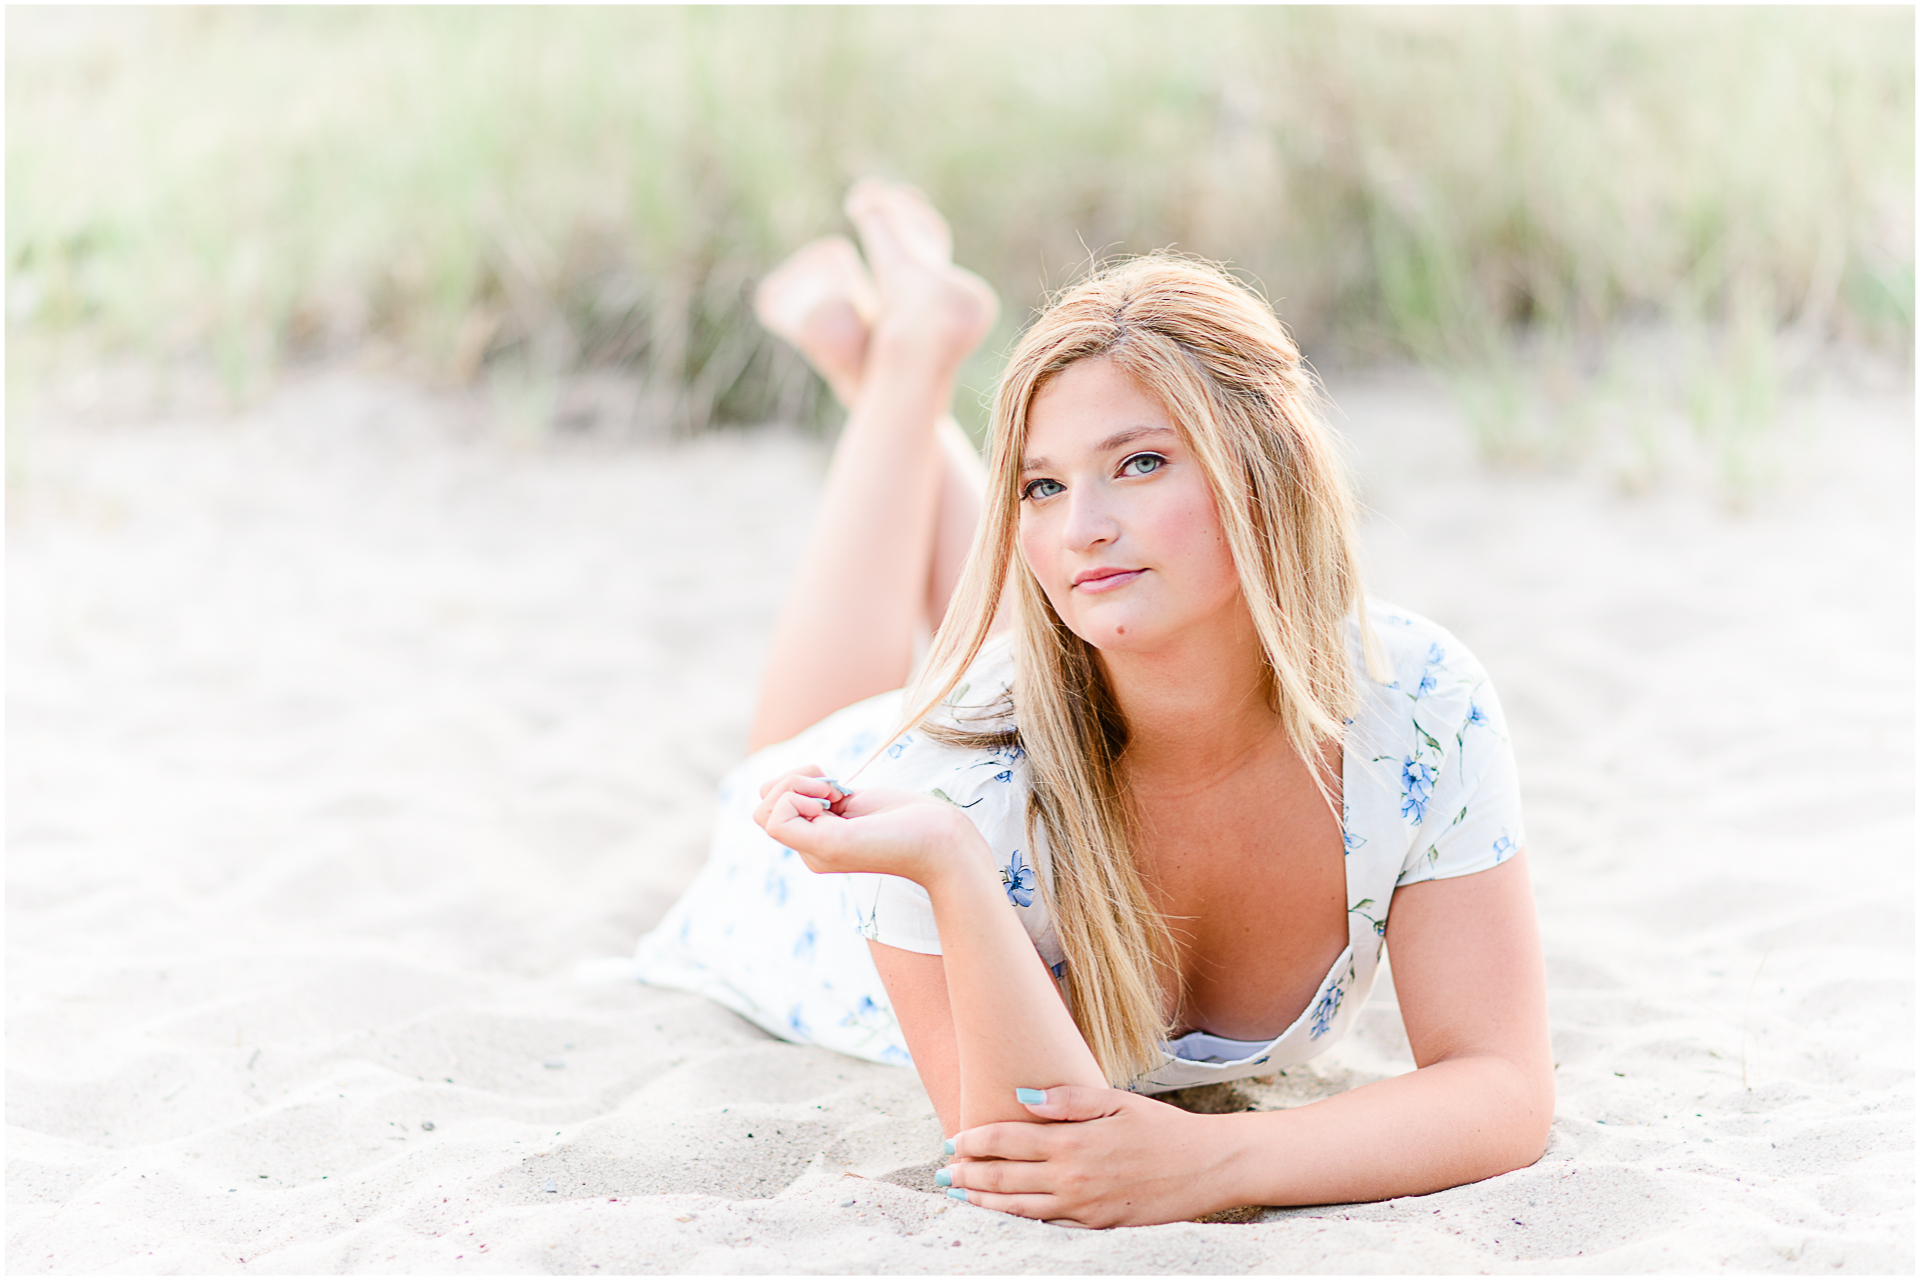 Photo by Marshfield senior portrait photographer Christina Runnals | High school girl wearing a white dress and laying in the sand on the beach